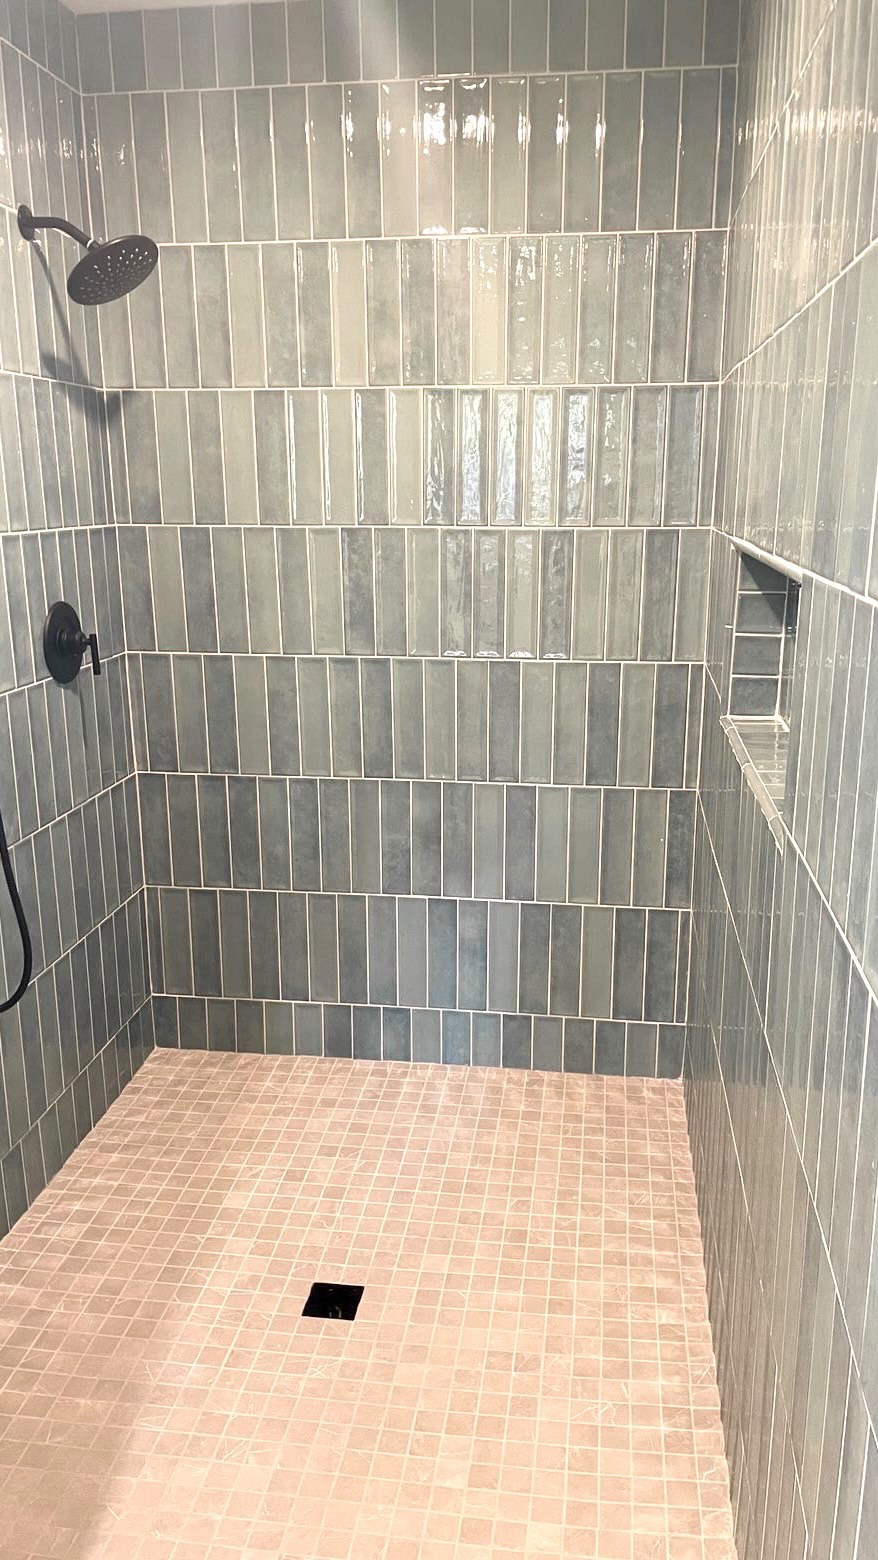 A GORGEOUS project ft. Raku in a “ocean” and Sterlina in “silver” 😍@totaldesignkc @tilewithsav  #emsertile